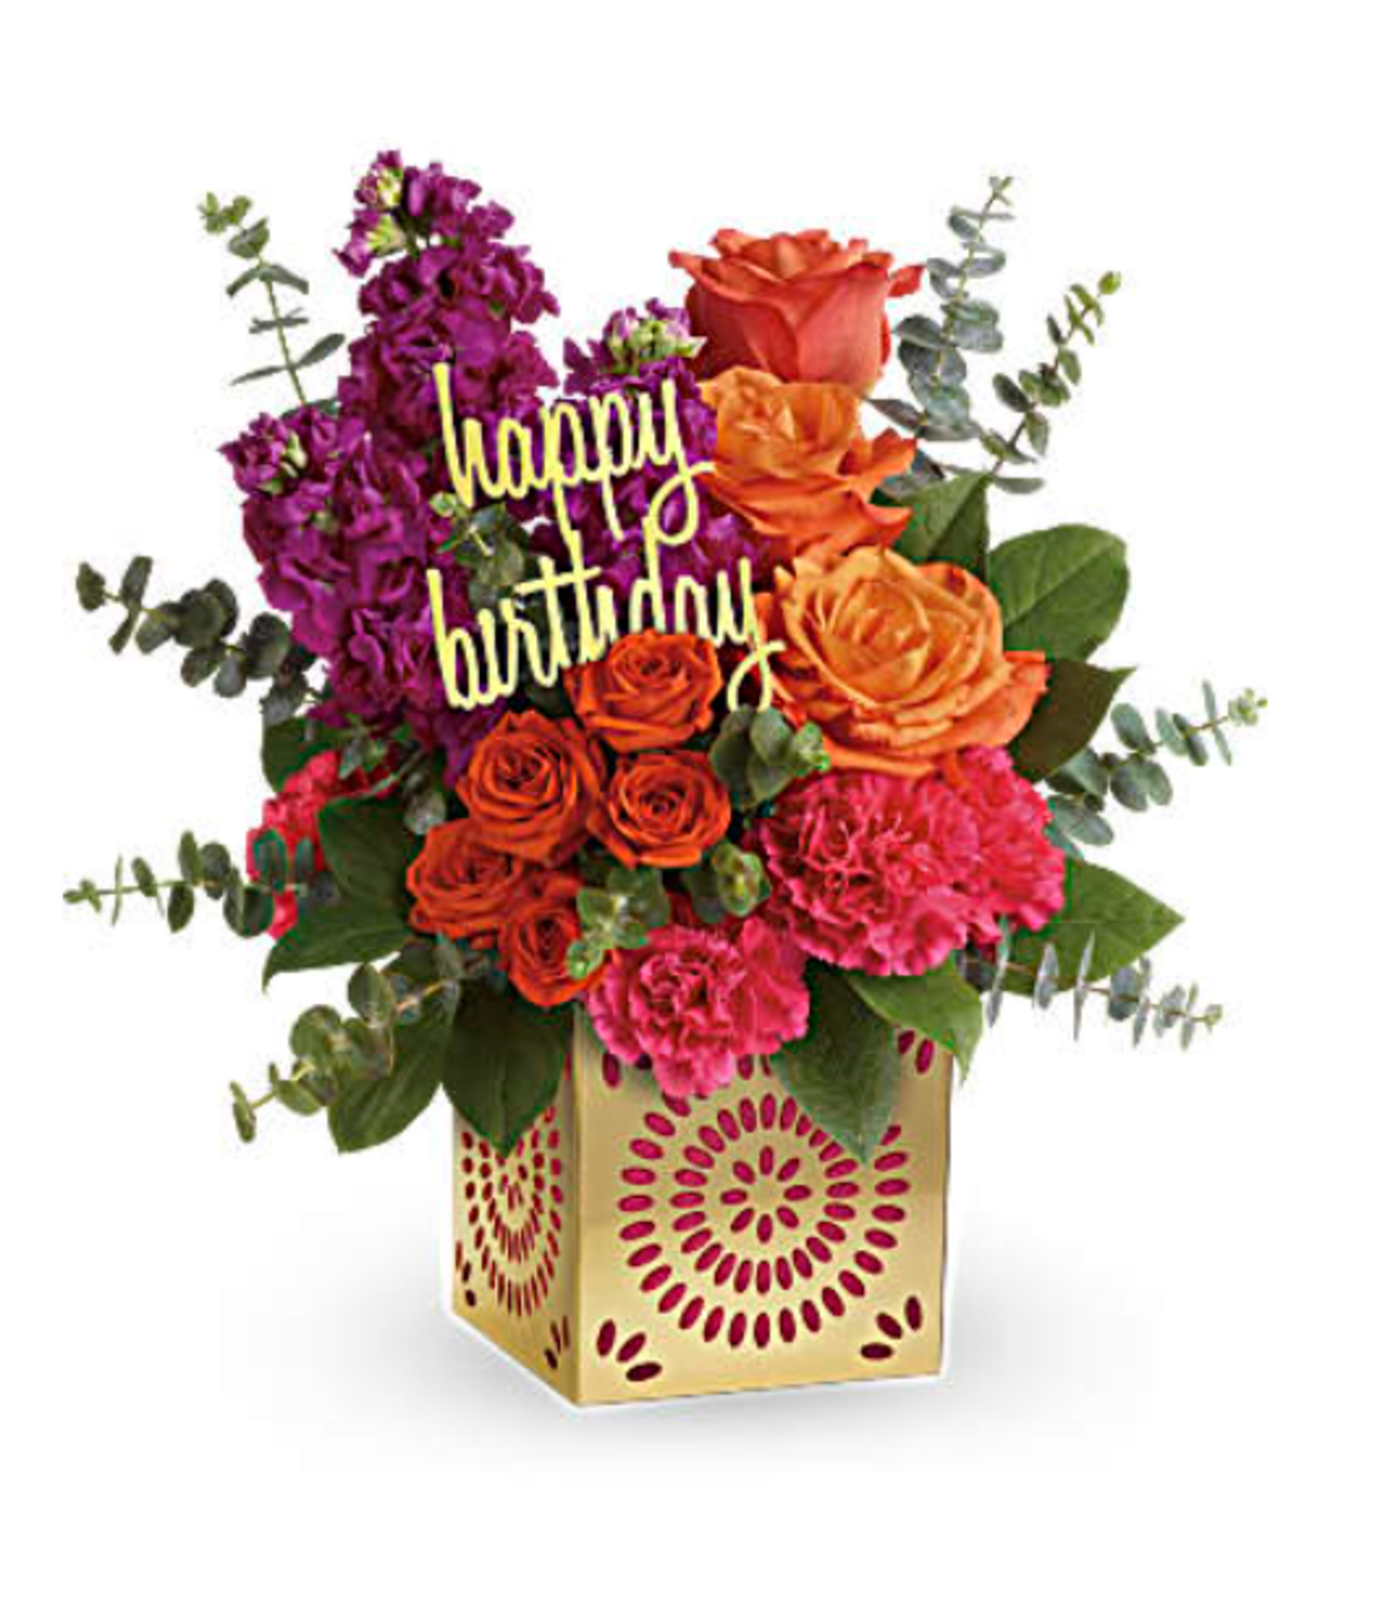 ELEGANT BLOOMING BIRTHDAY BOUQUET - Send to Brooklyn, NY Today!